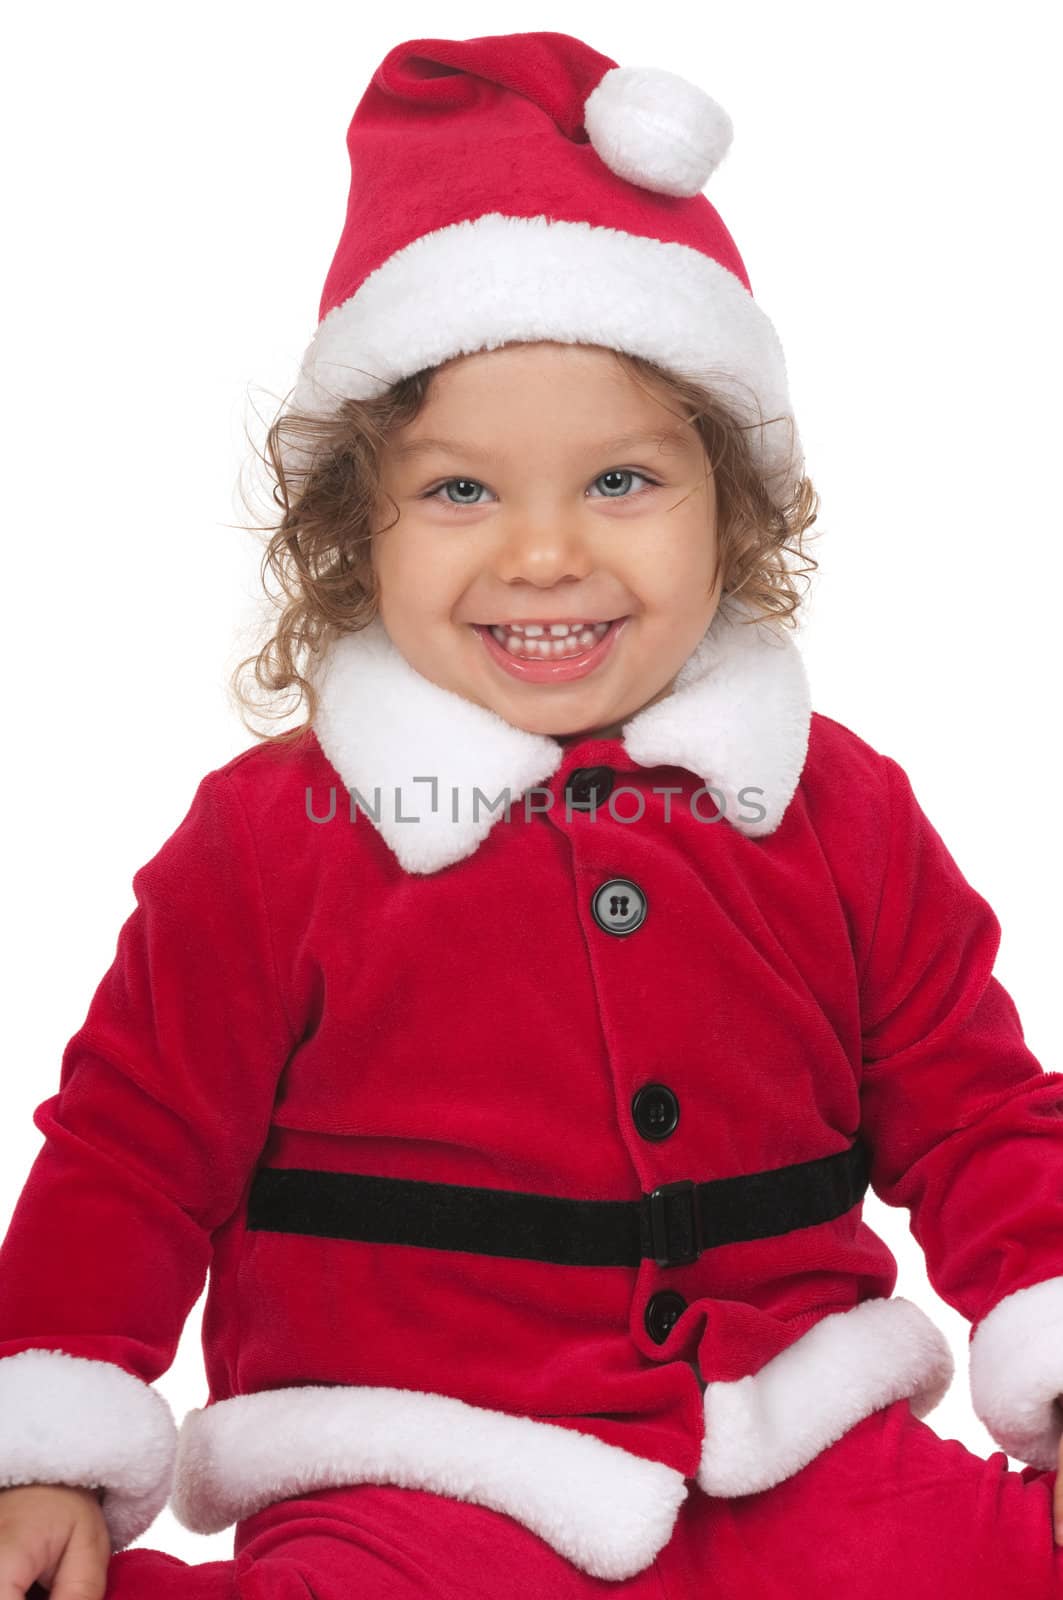 Cute child with Santa Claus outfit